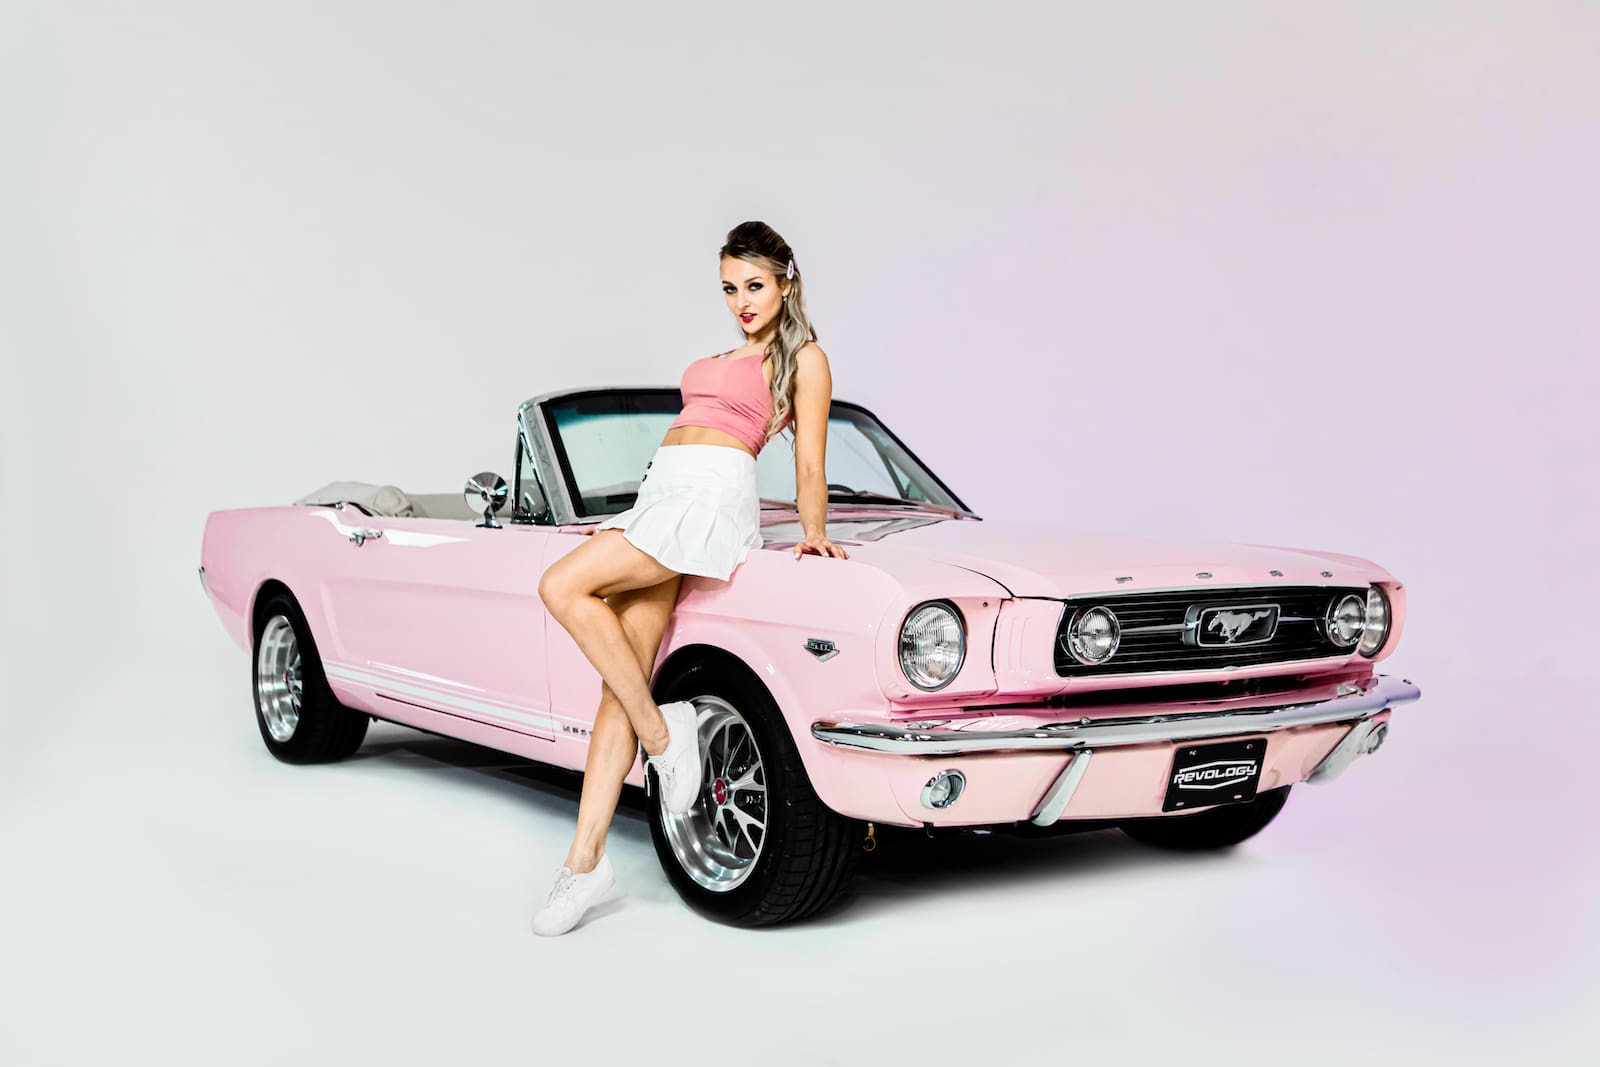 Revology Cars hits its car 100 milestone with a pink, Playboy-inspired GT  convertible - Revology Cars